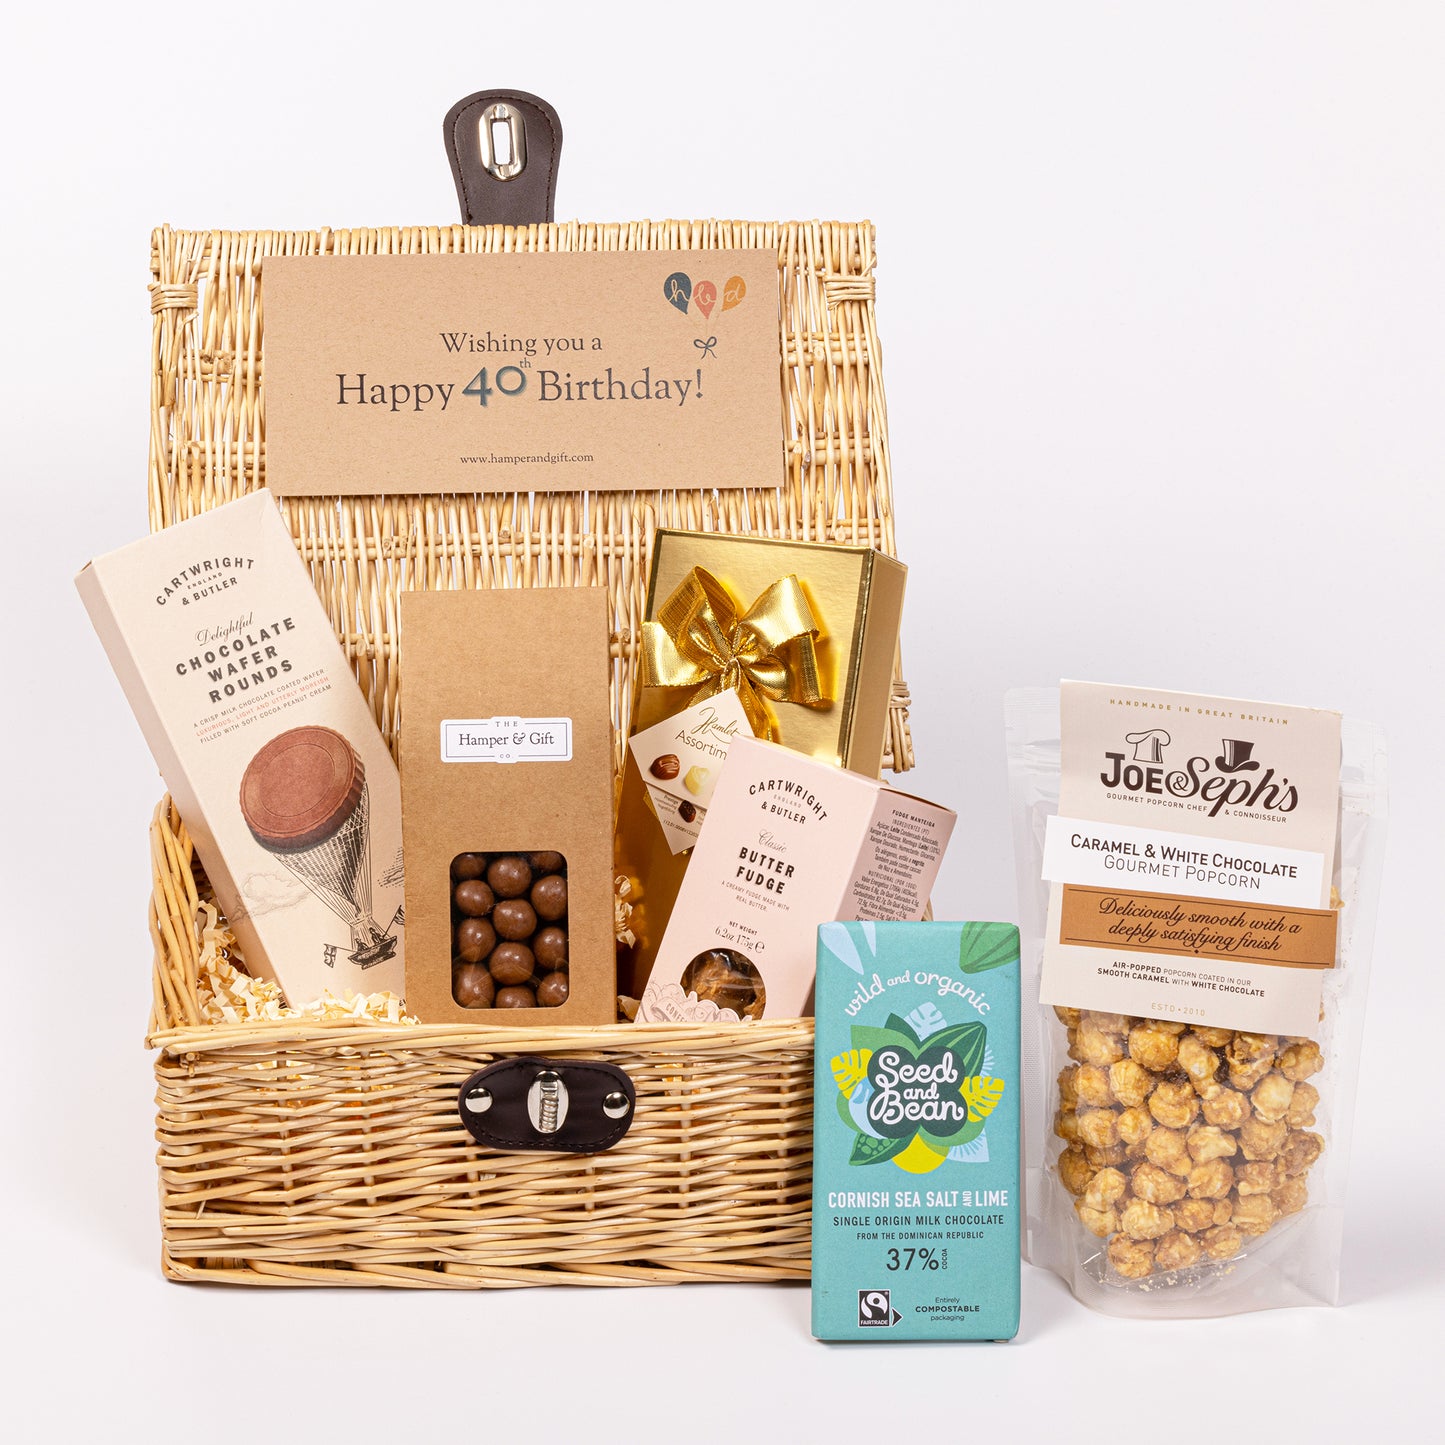 40th Birthday Chocolate & Fudge Hamper filled with a variety of chocolate, fudge, biscuit and gourmet popcorn